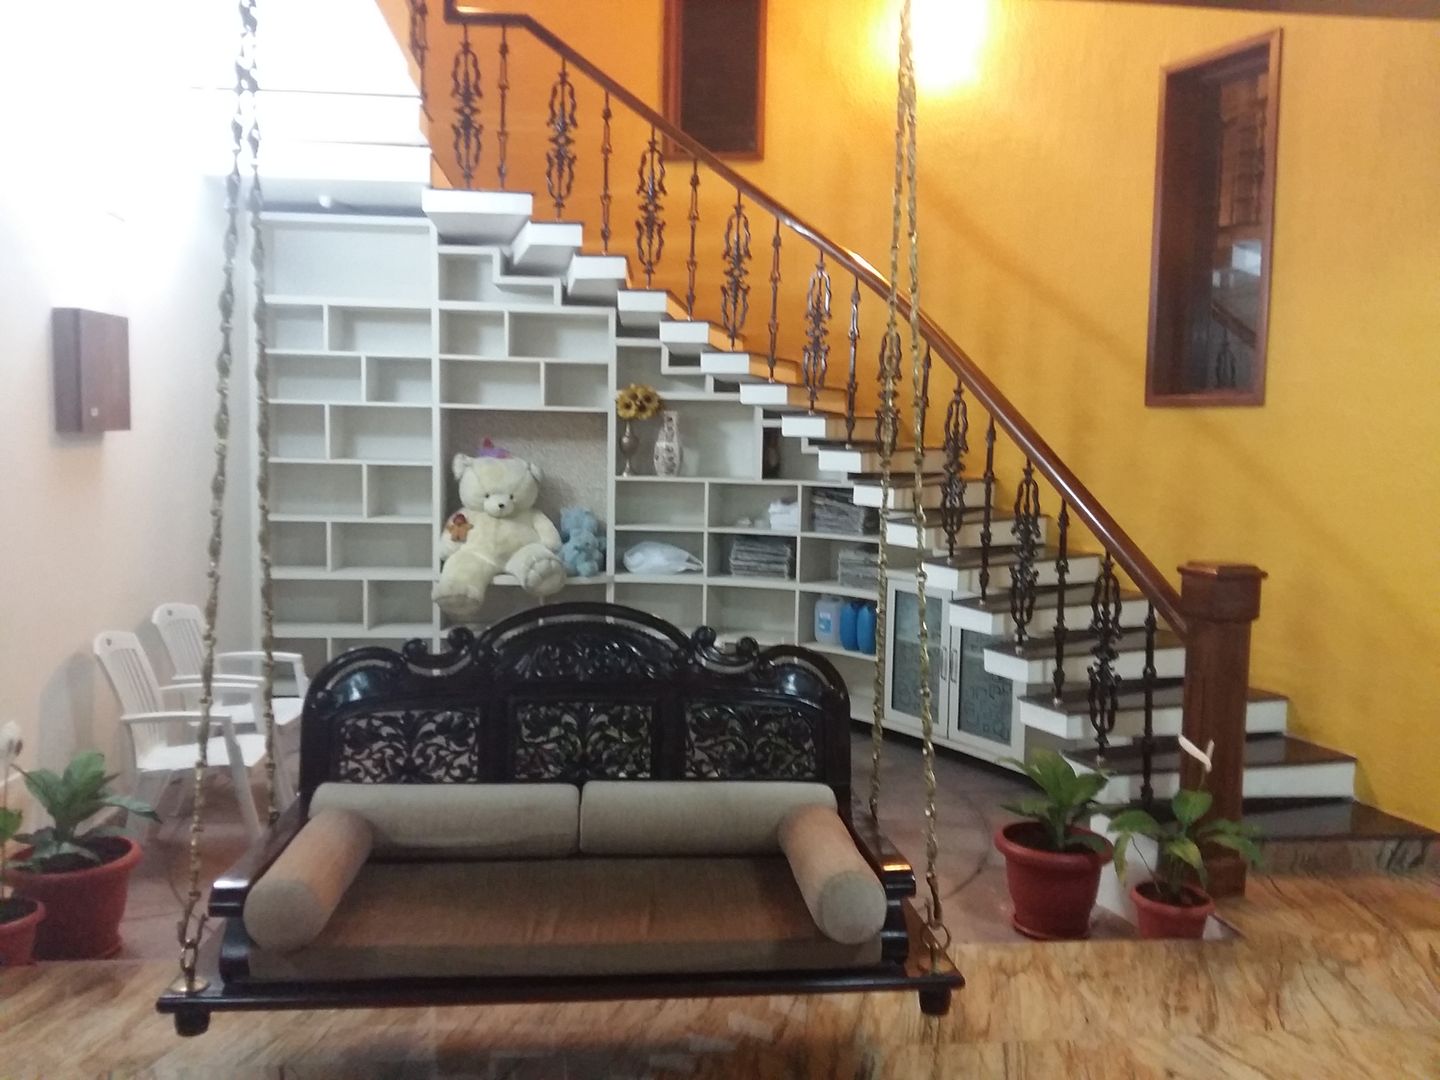 ANUGRAHA - RESIDENCE FOR MR.MUKUND, One Brick At A Time One Brick At A Time Escaleras